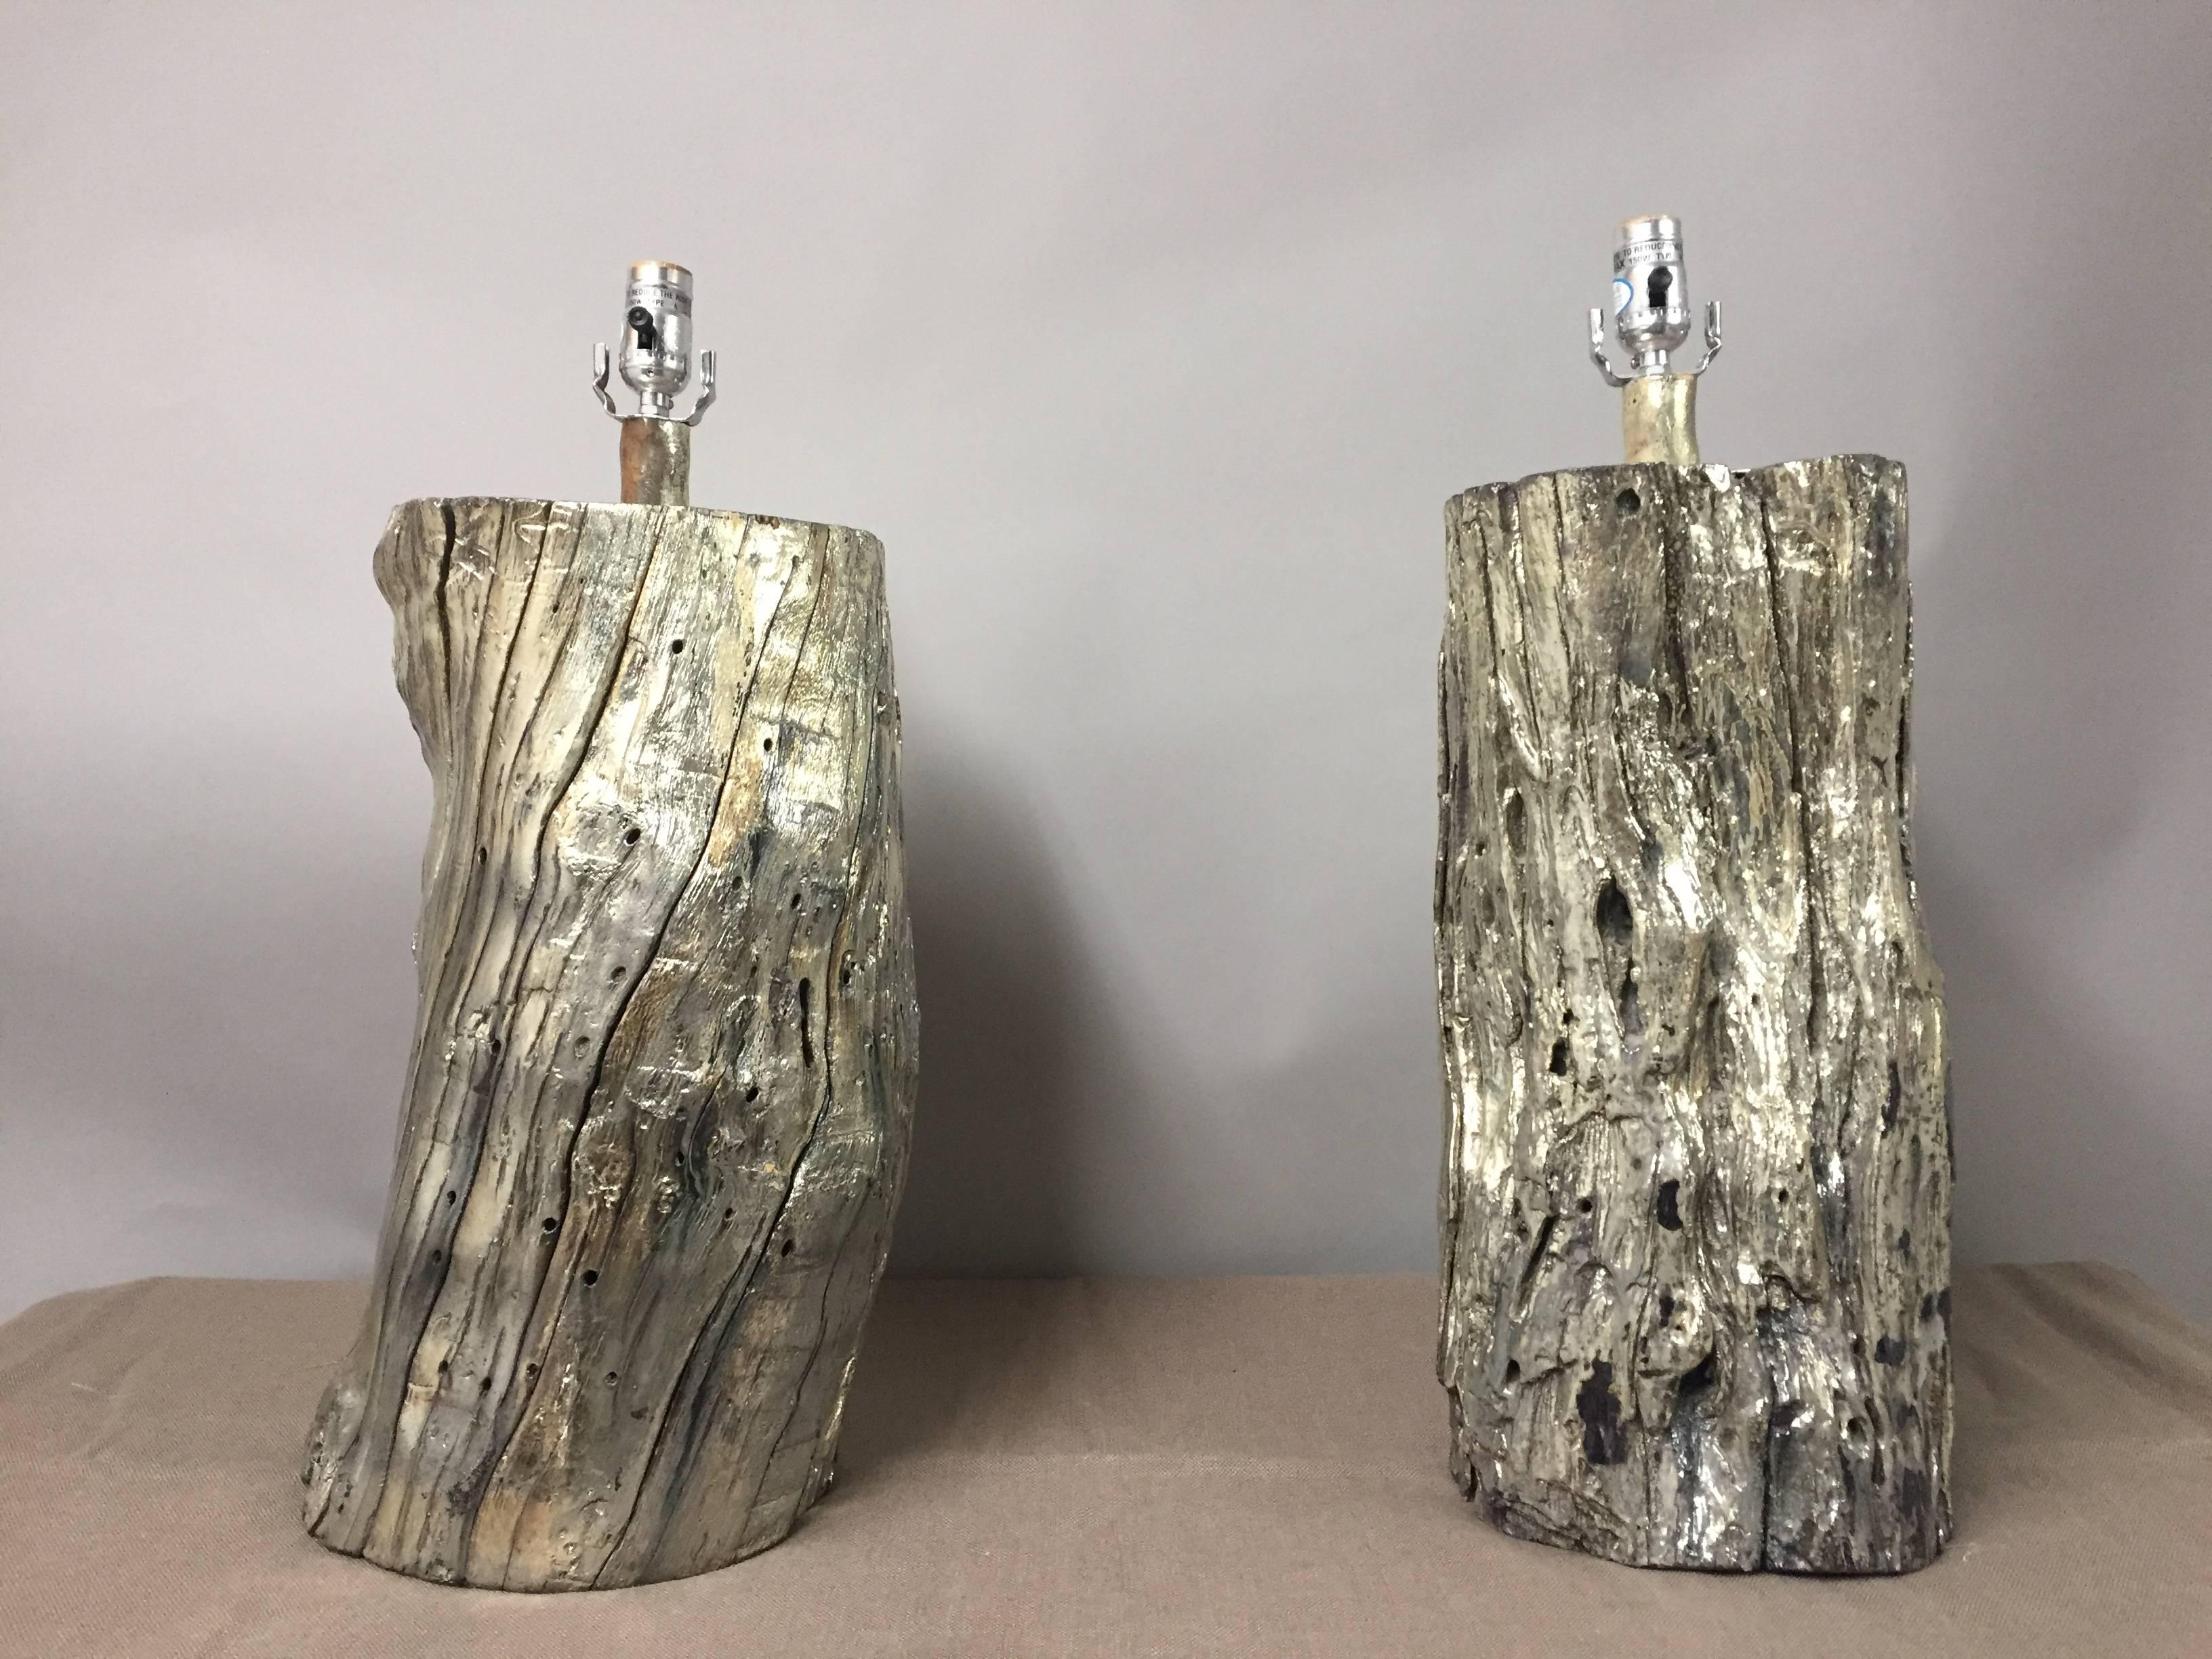 Two eye-catching table lamps having chunky organic log wood bases glamorized with silvered giltmetal and custom brown silk shades. By Tanner Kenzie.